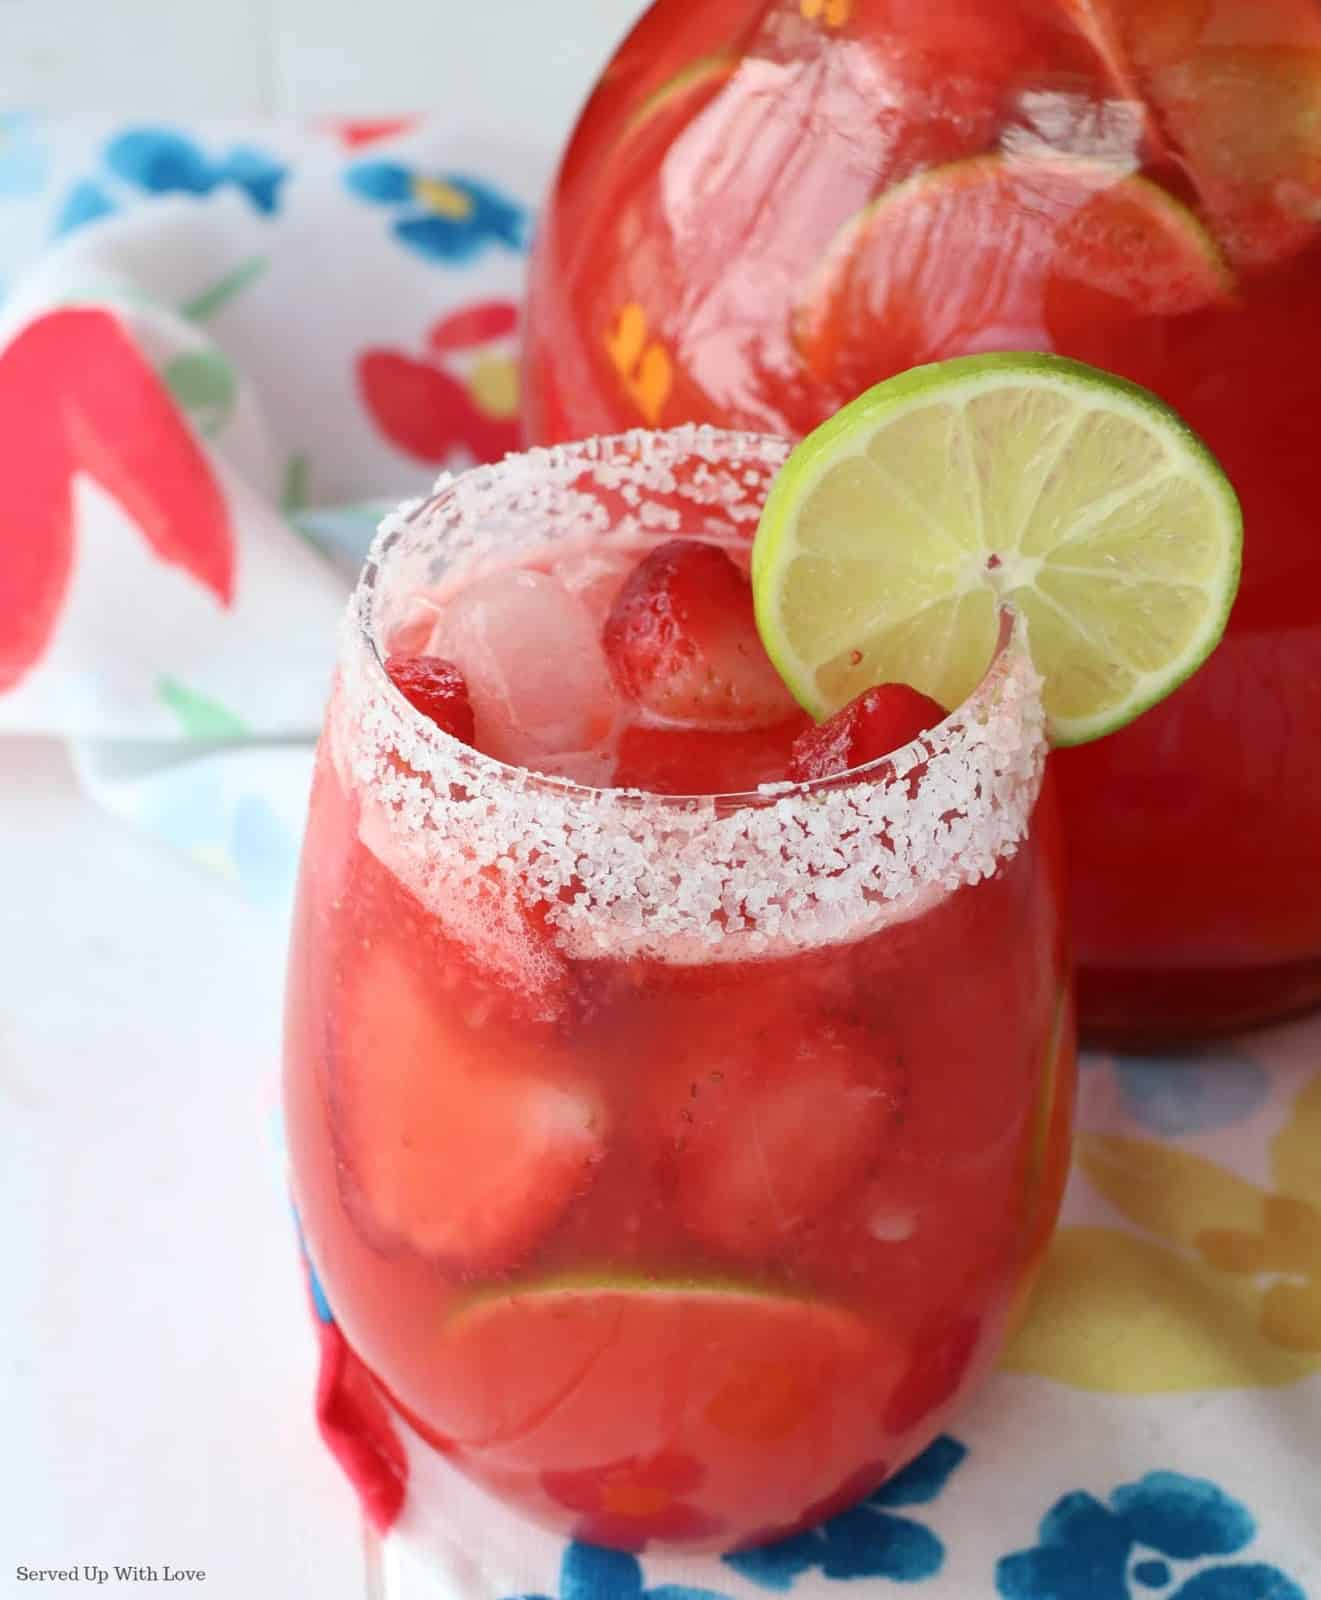 Served Up With Love: Strawberry Margarita Punch